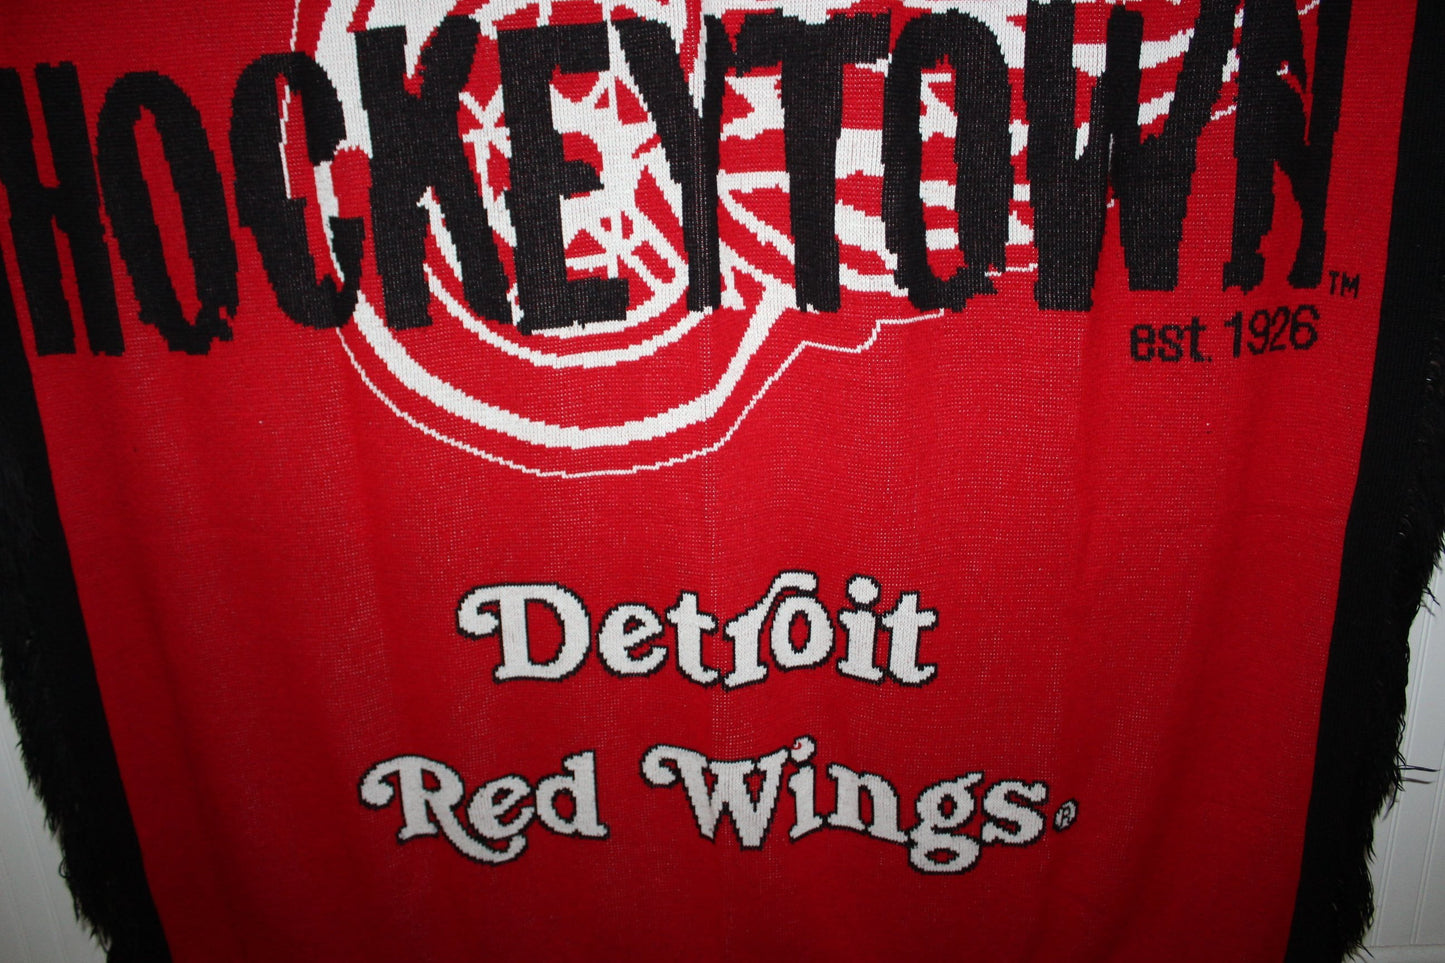 Detroit Red Wings Throw Blanket  Acrylic Knit Logo Sweater Weave large